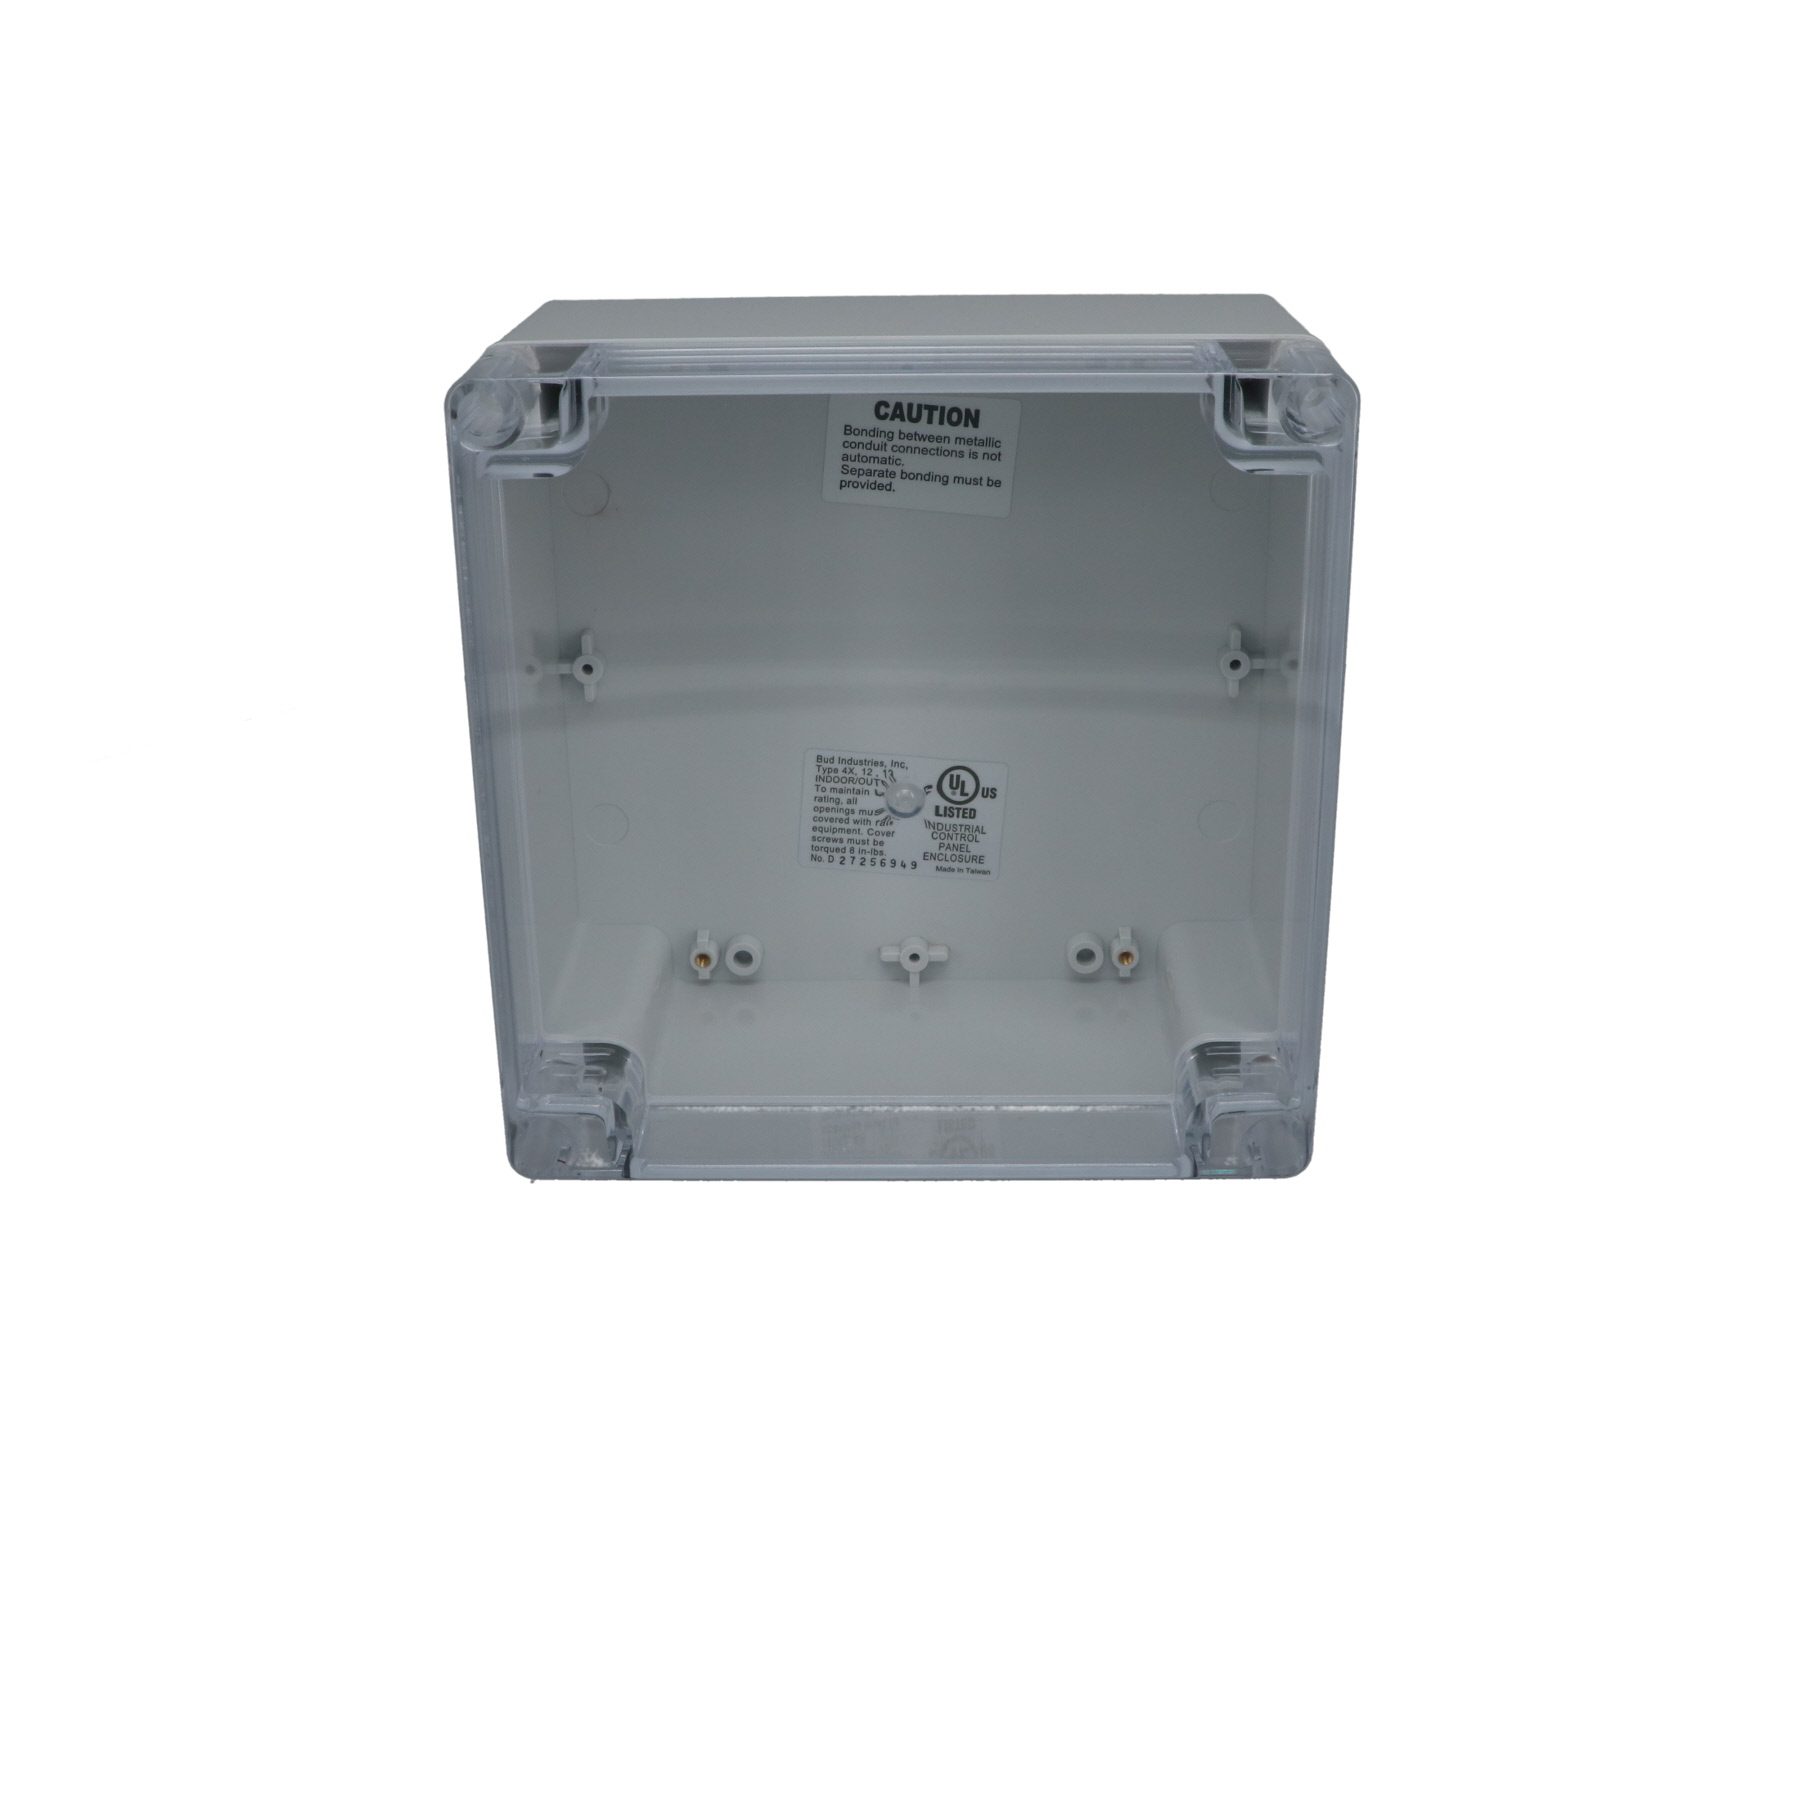 IP65 NEMA 4X Box with Clear Cover PN-1339-C